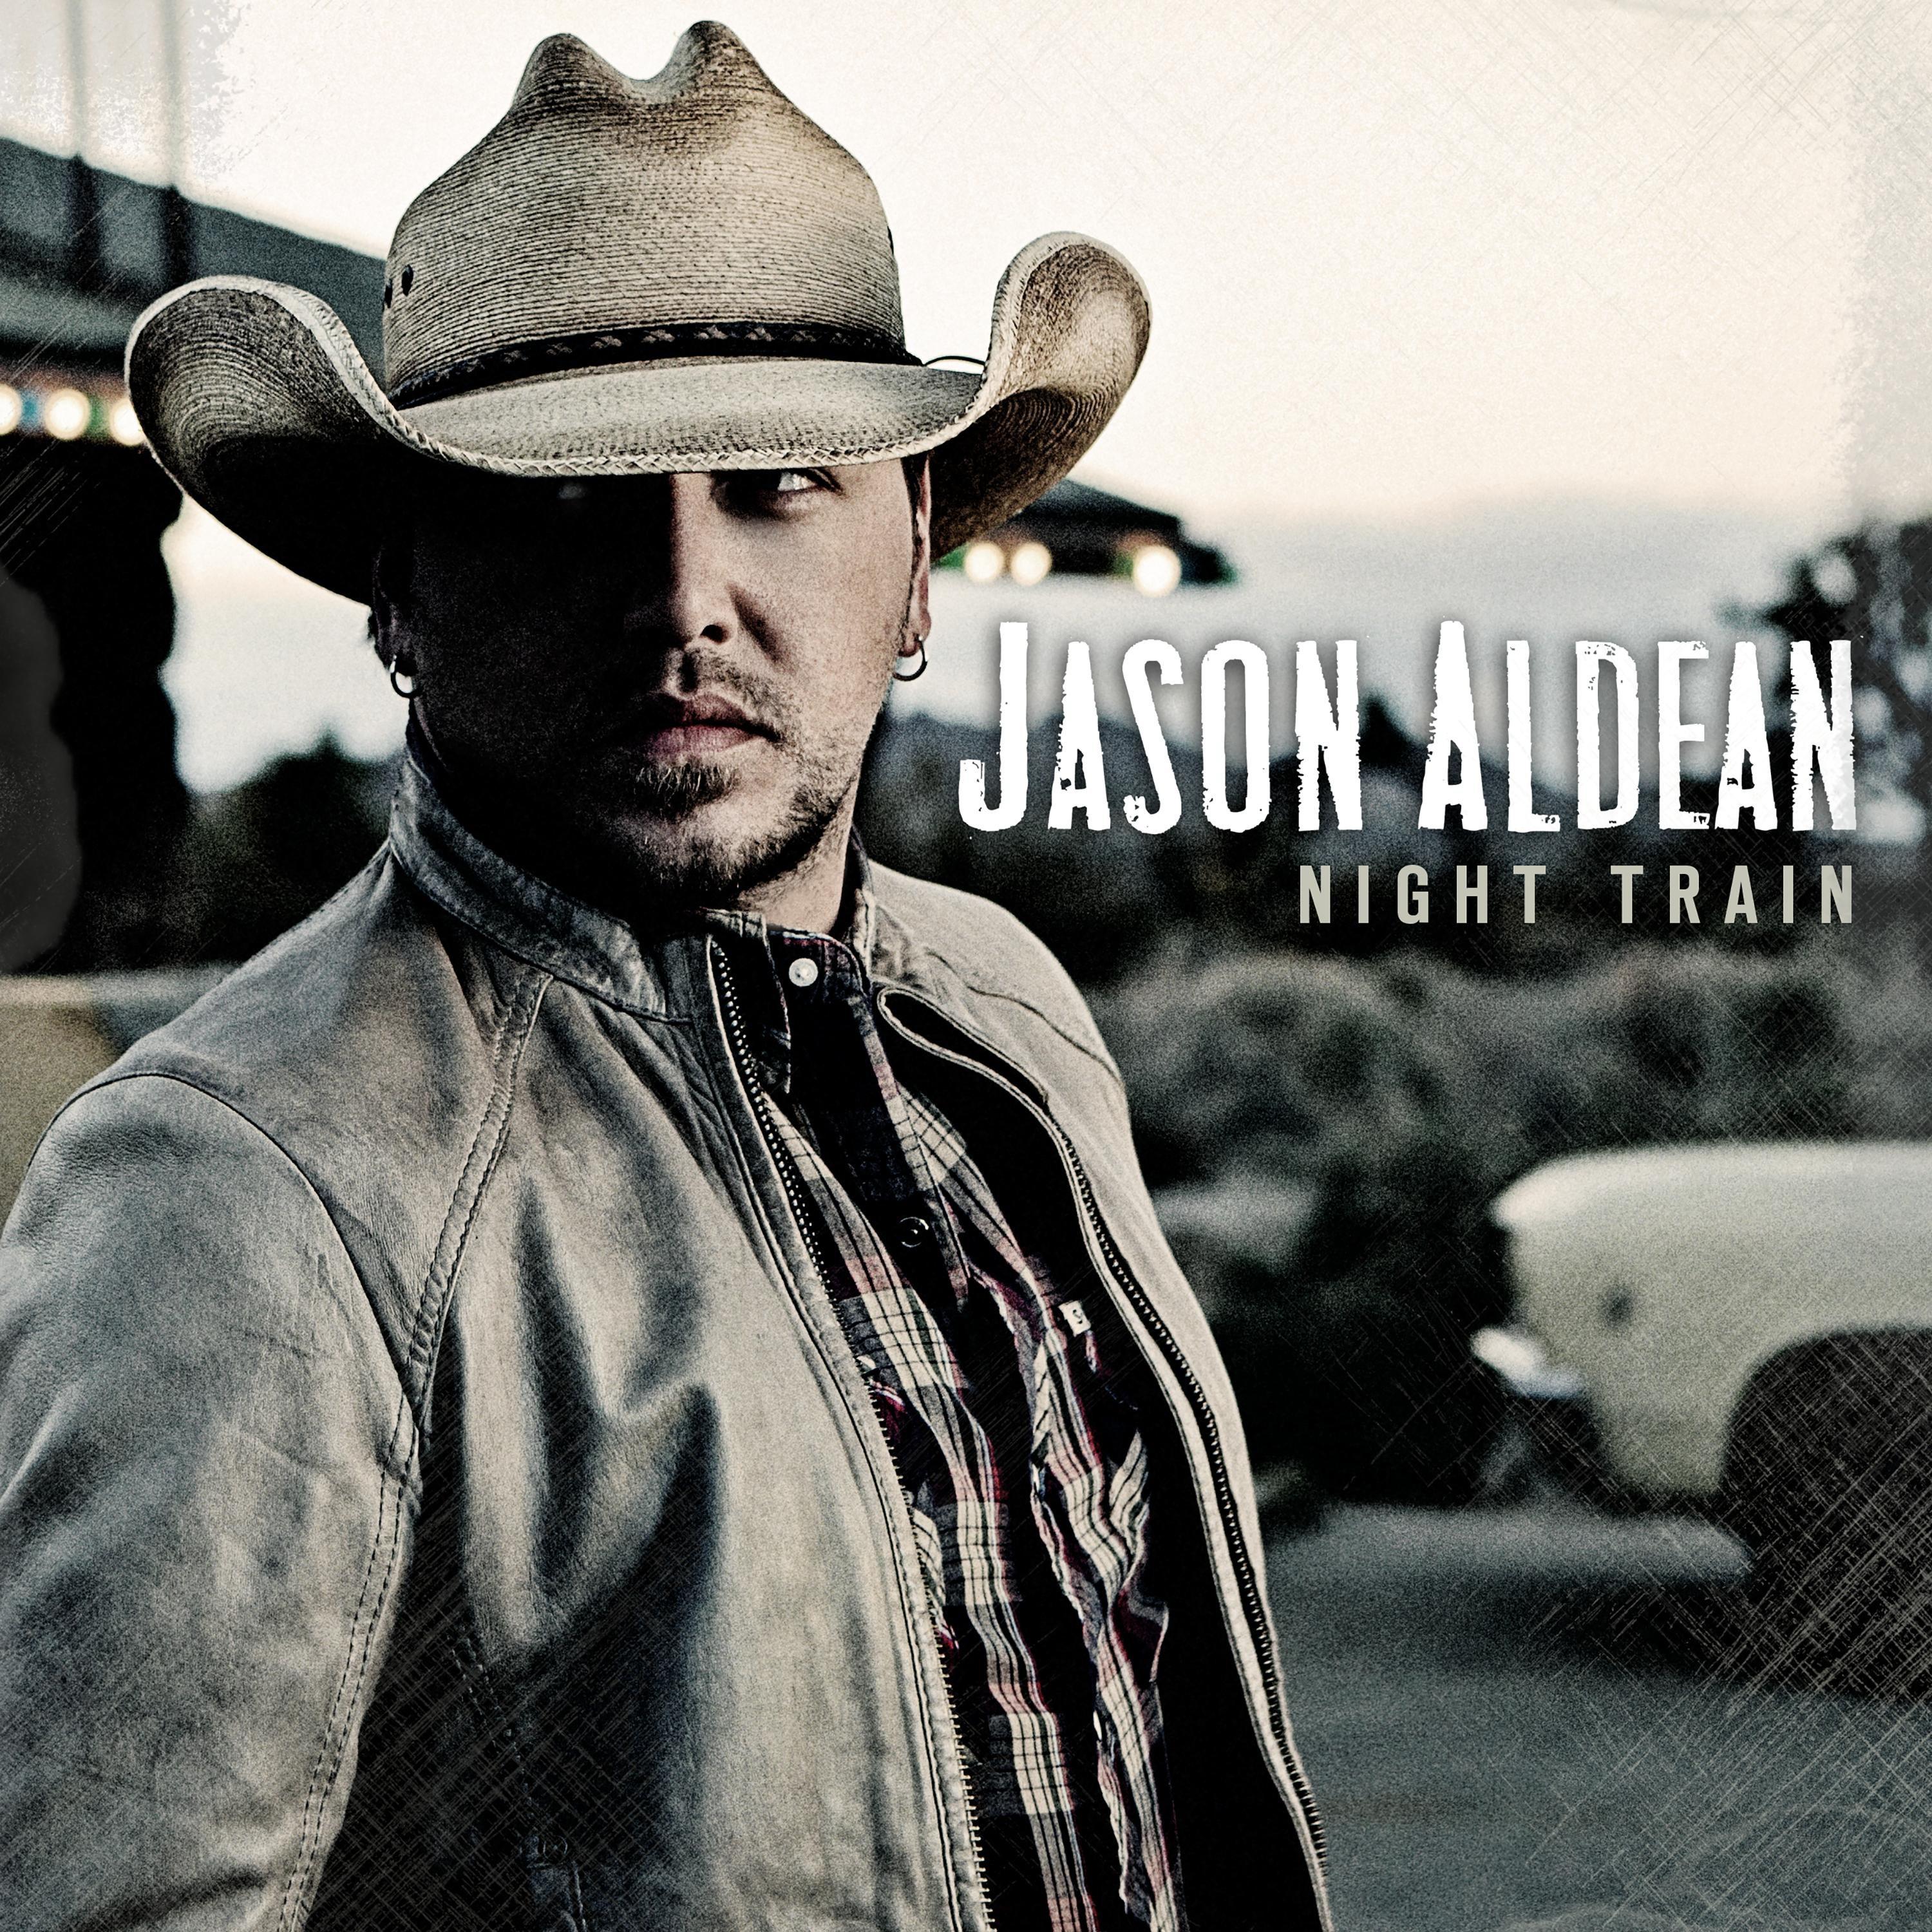 Jason Aldean - I Don't Do Lonely Well